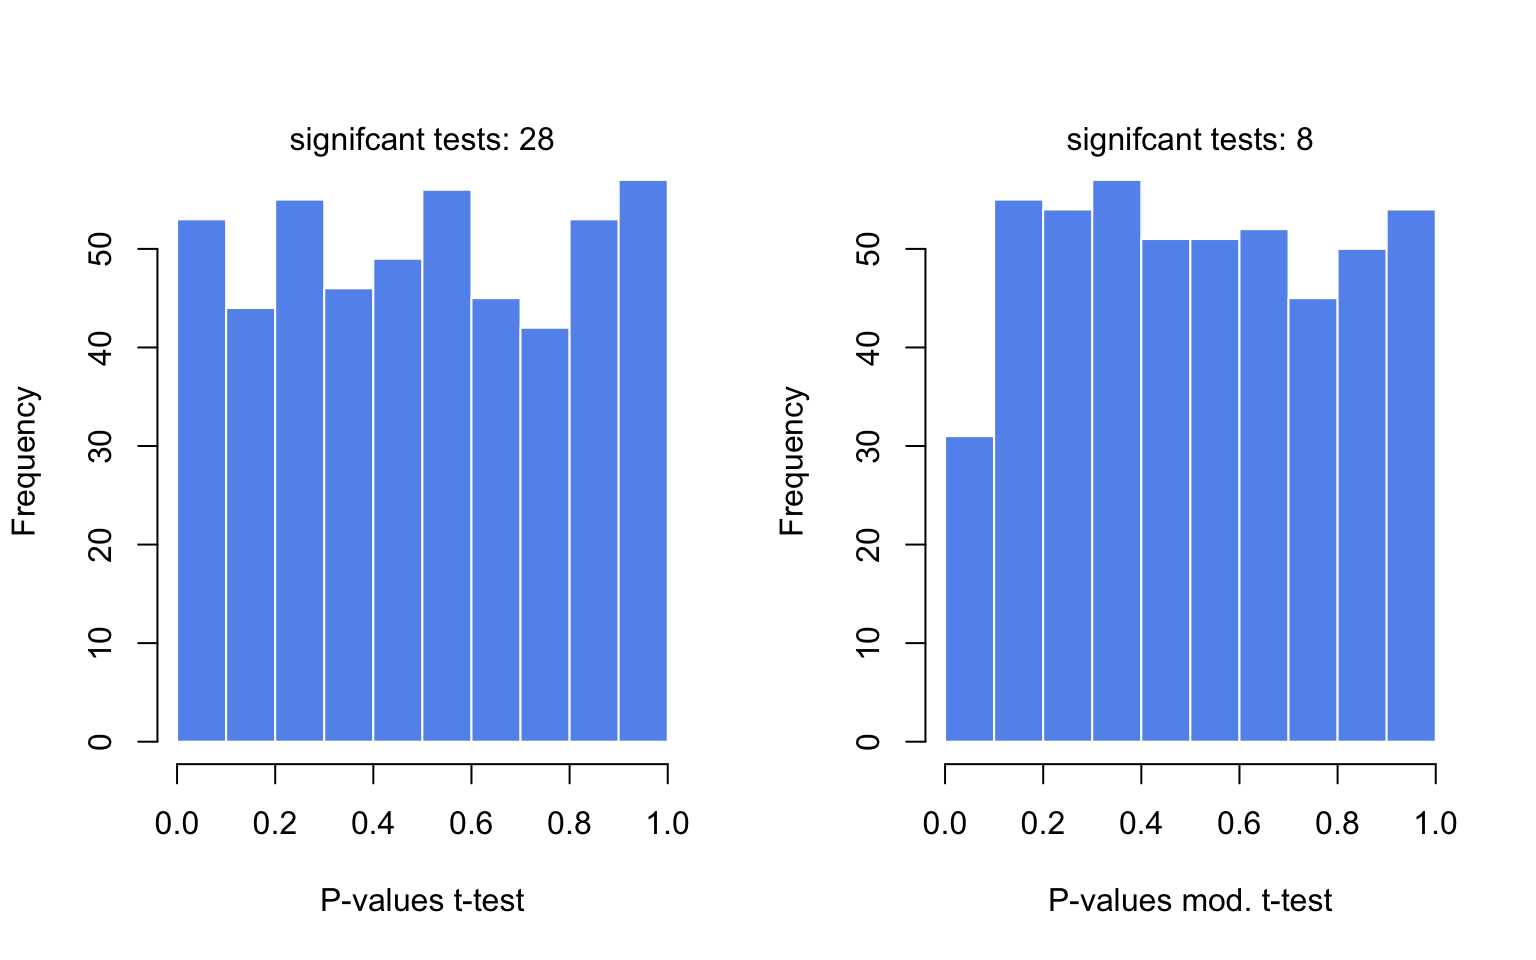 The distributions of P-values obtained by t-tests and moderated t-tests